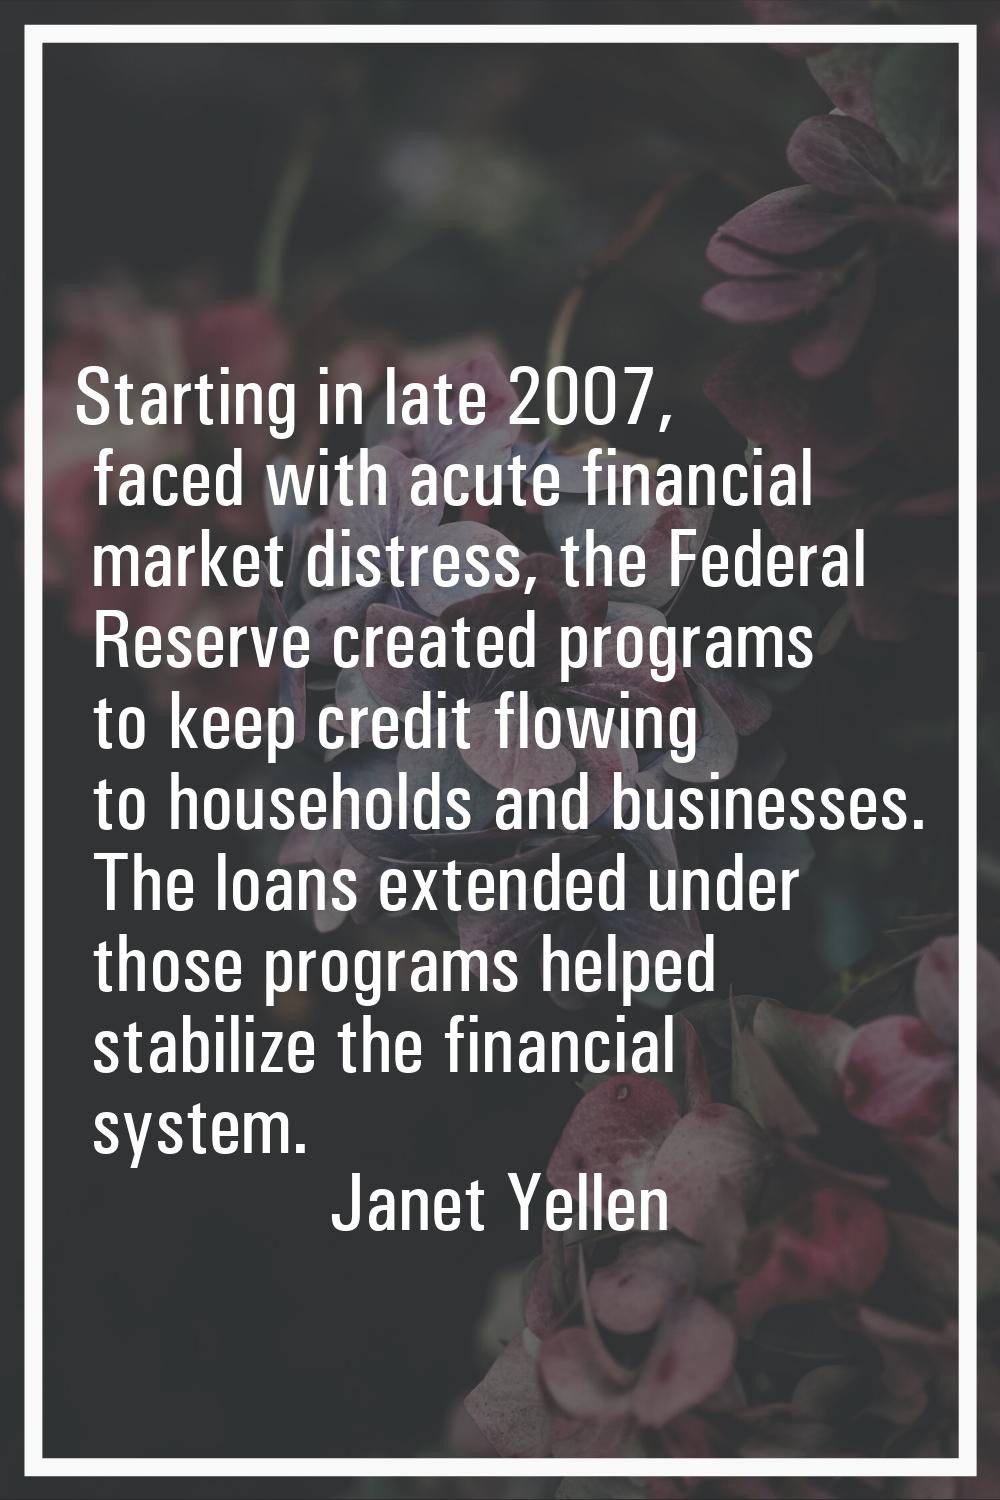 Starting in late 2007, faced with acute financial market distress, the Federal Reserve created prog